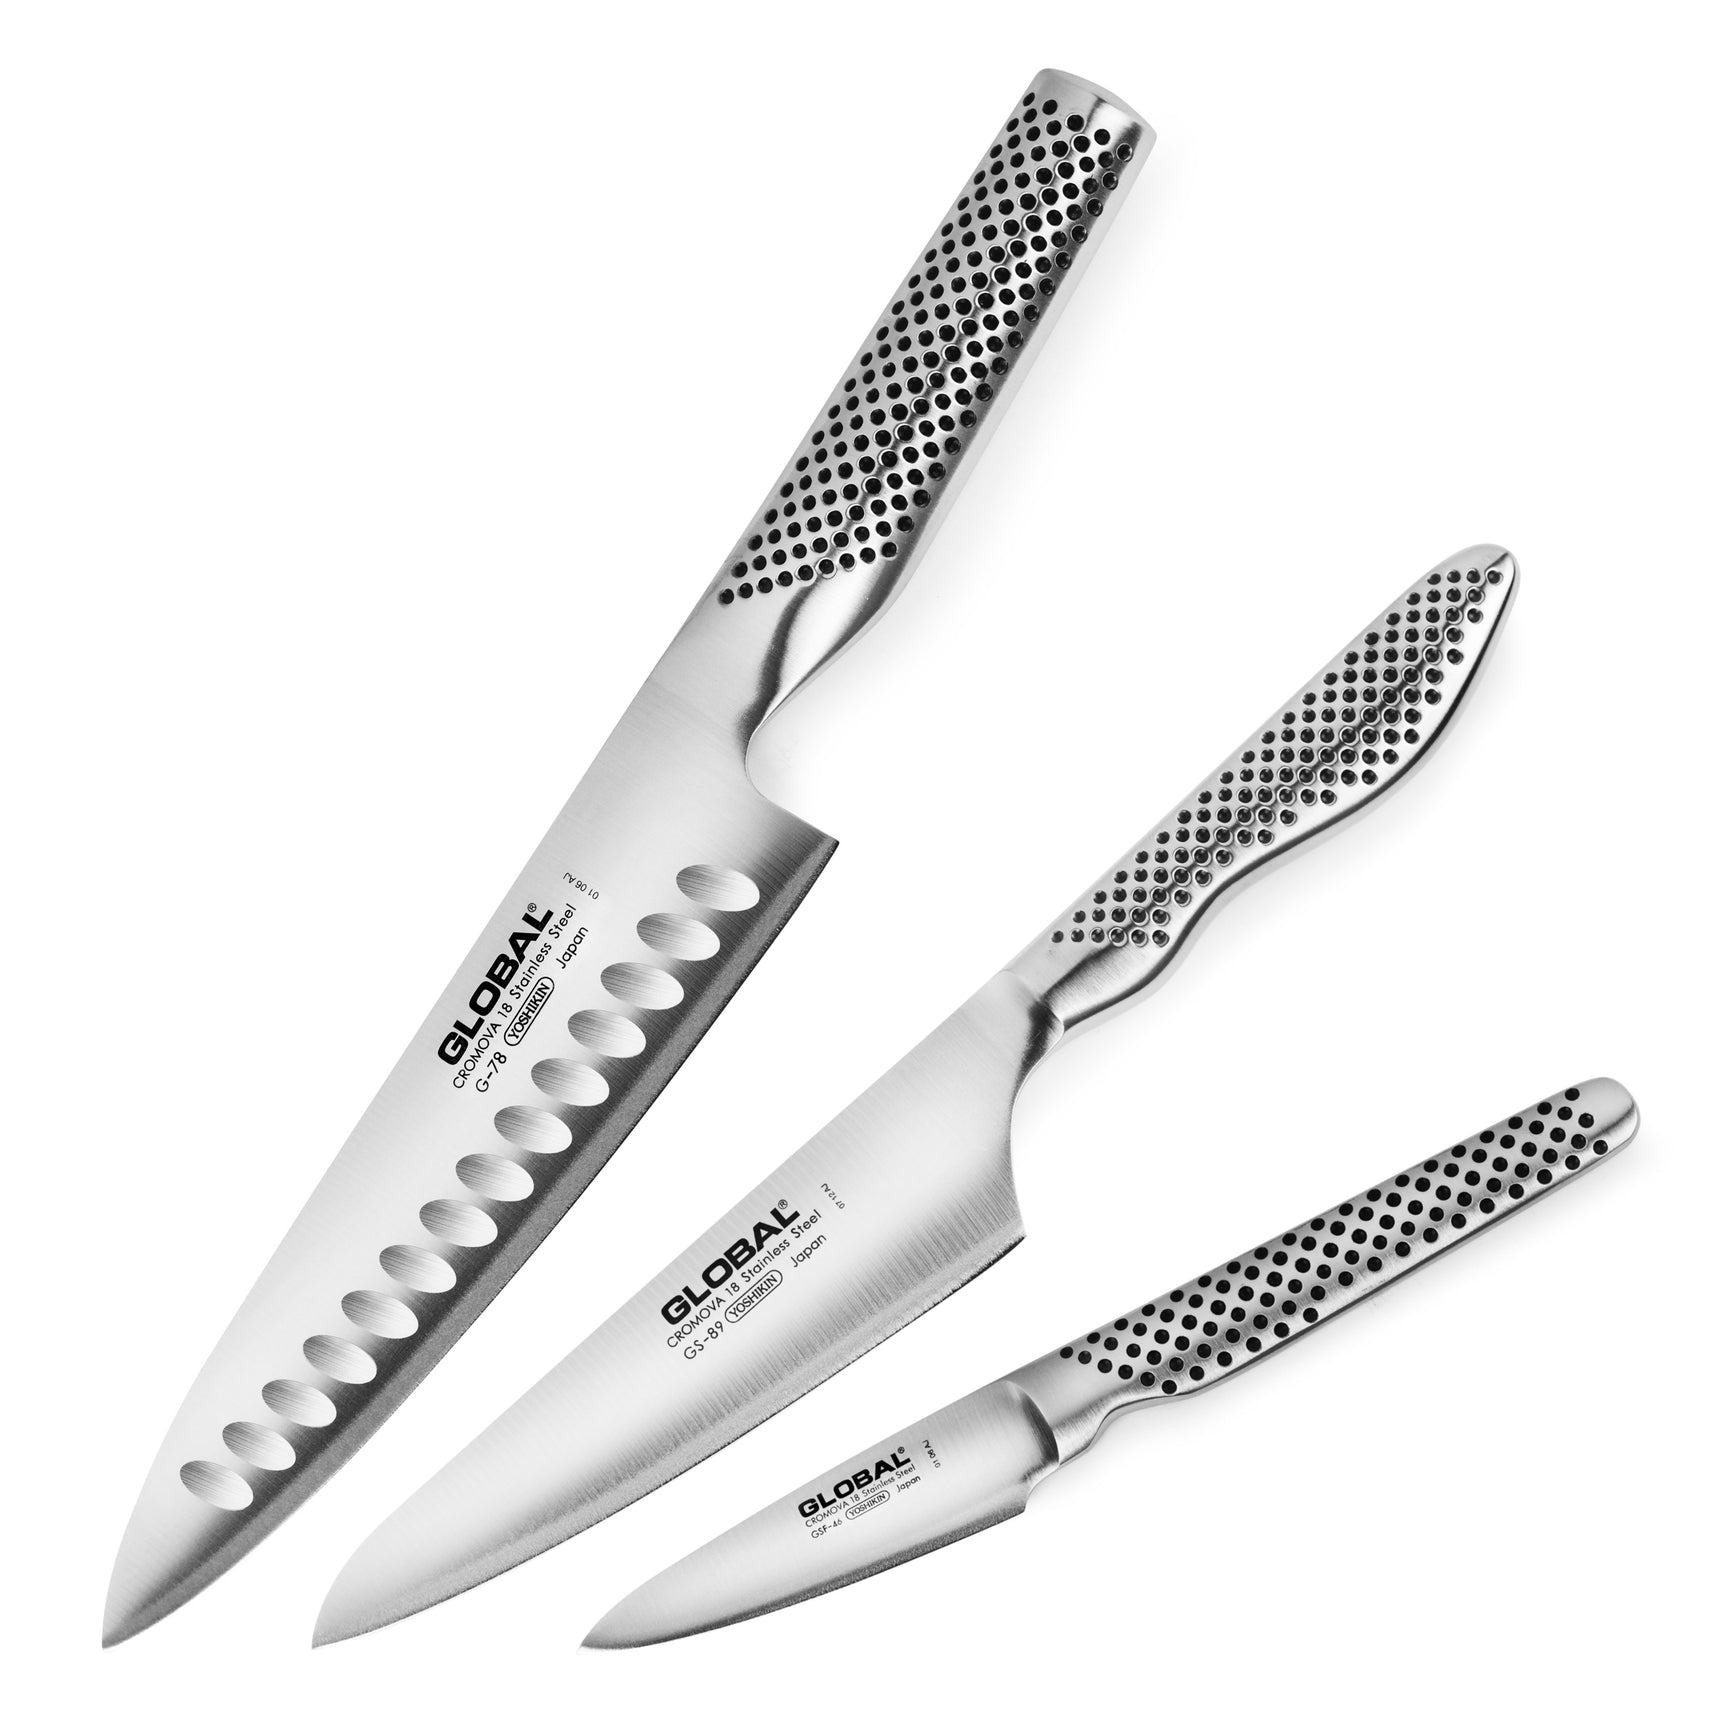 Global Knife Sets – Cutlery and More